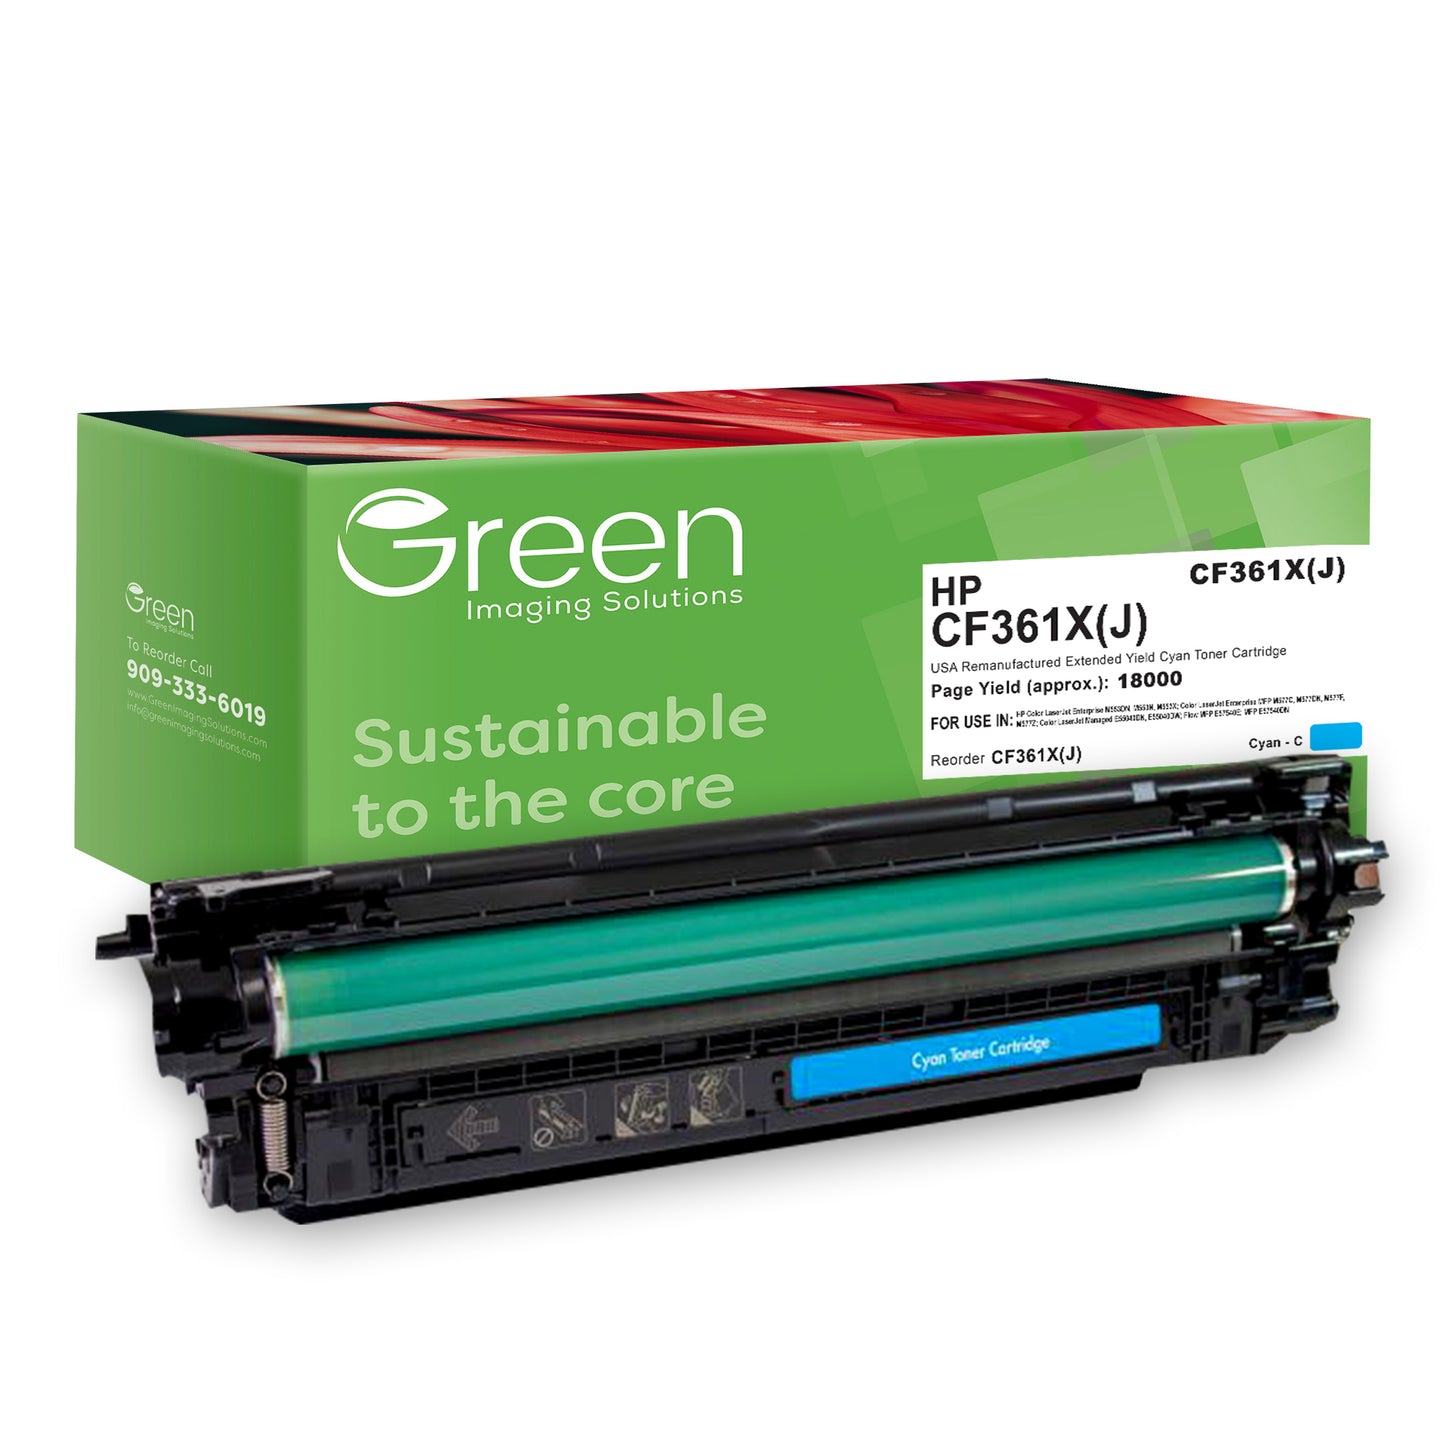 GIS USA Remanufactured Extended Yield Cyan Toner Cartridge for HP CF361X